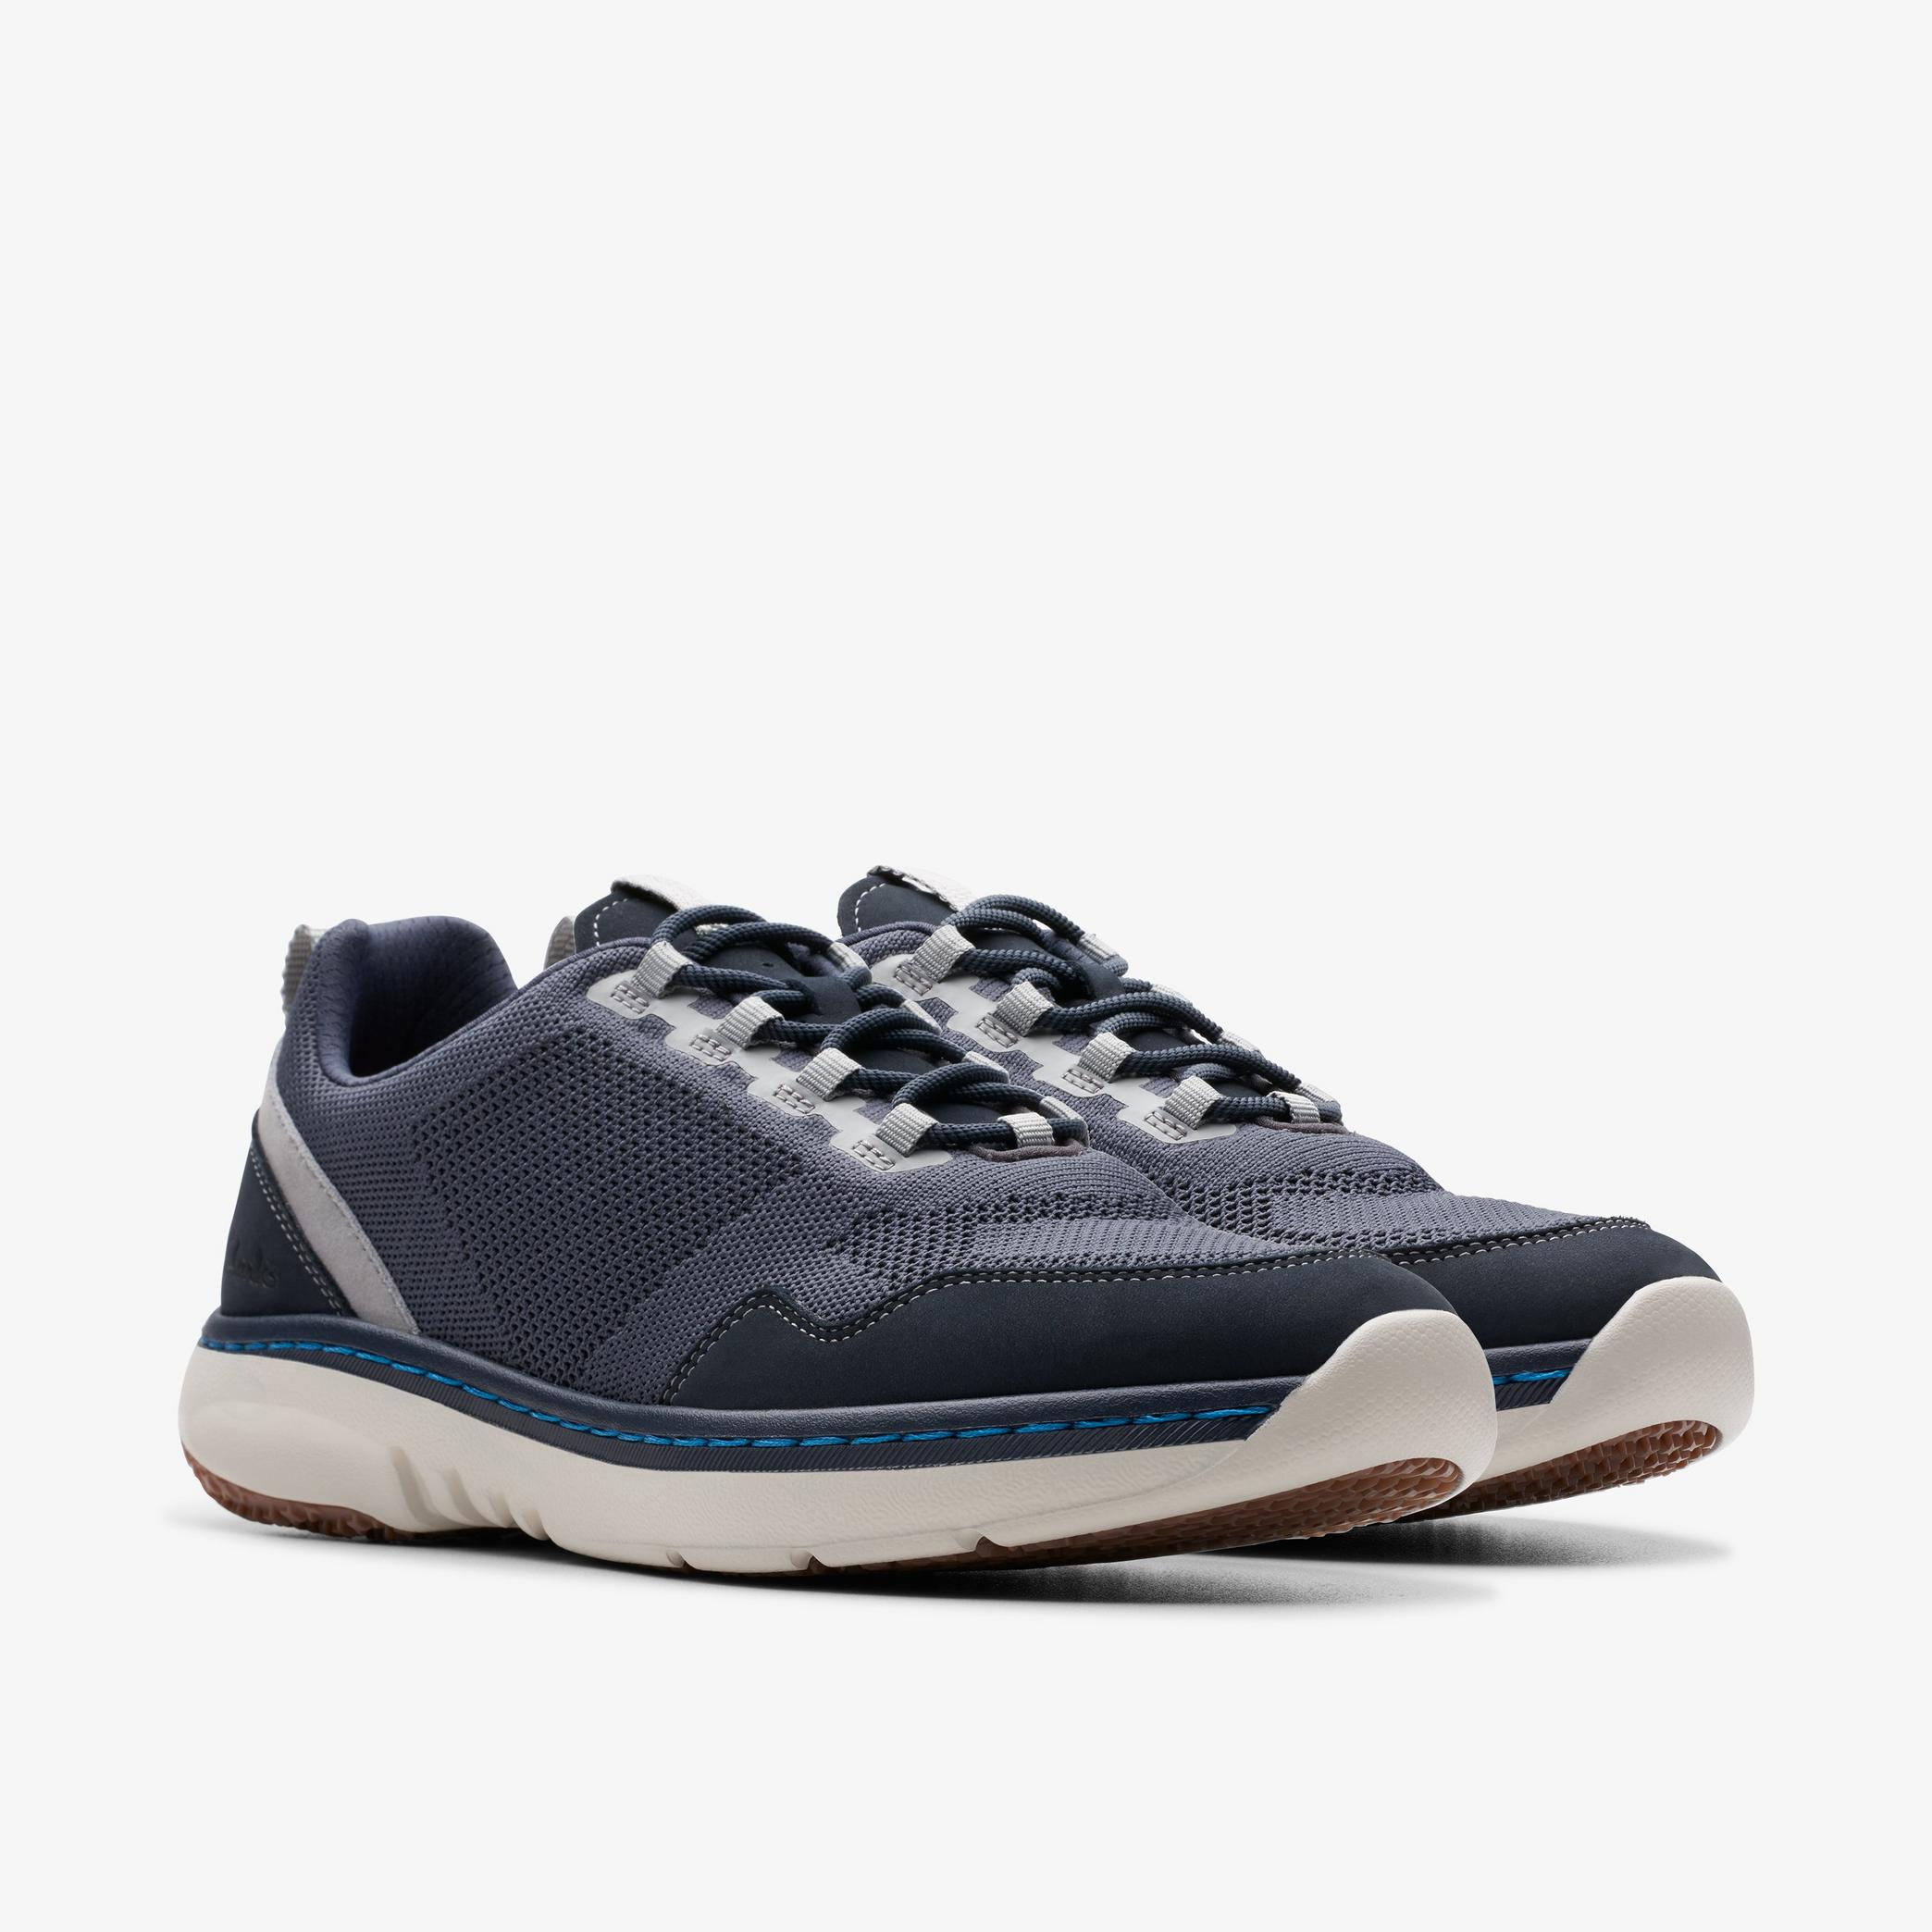 Clarks Pro Knit Navy Combination Trainers, view 4 of 6